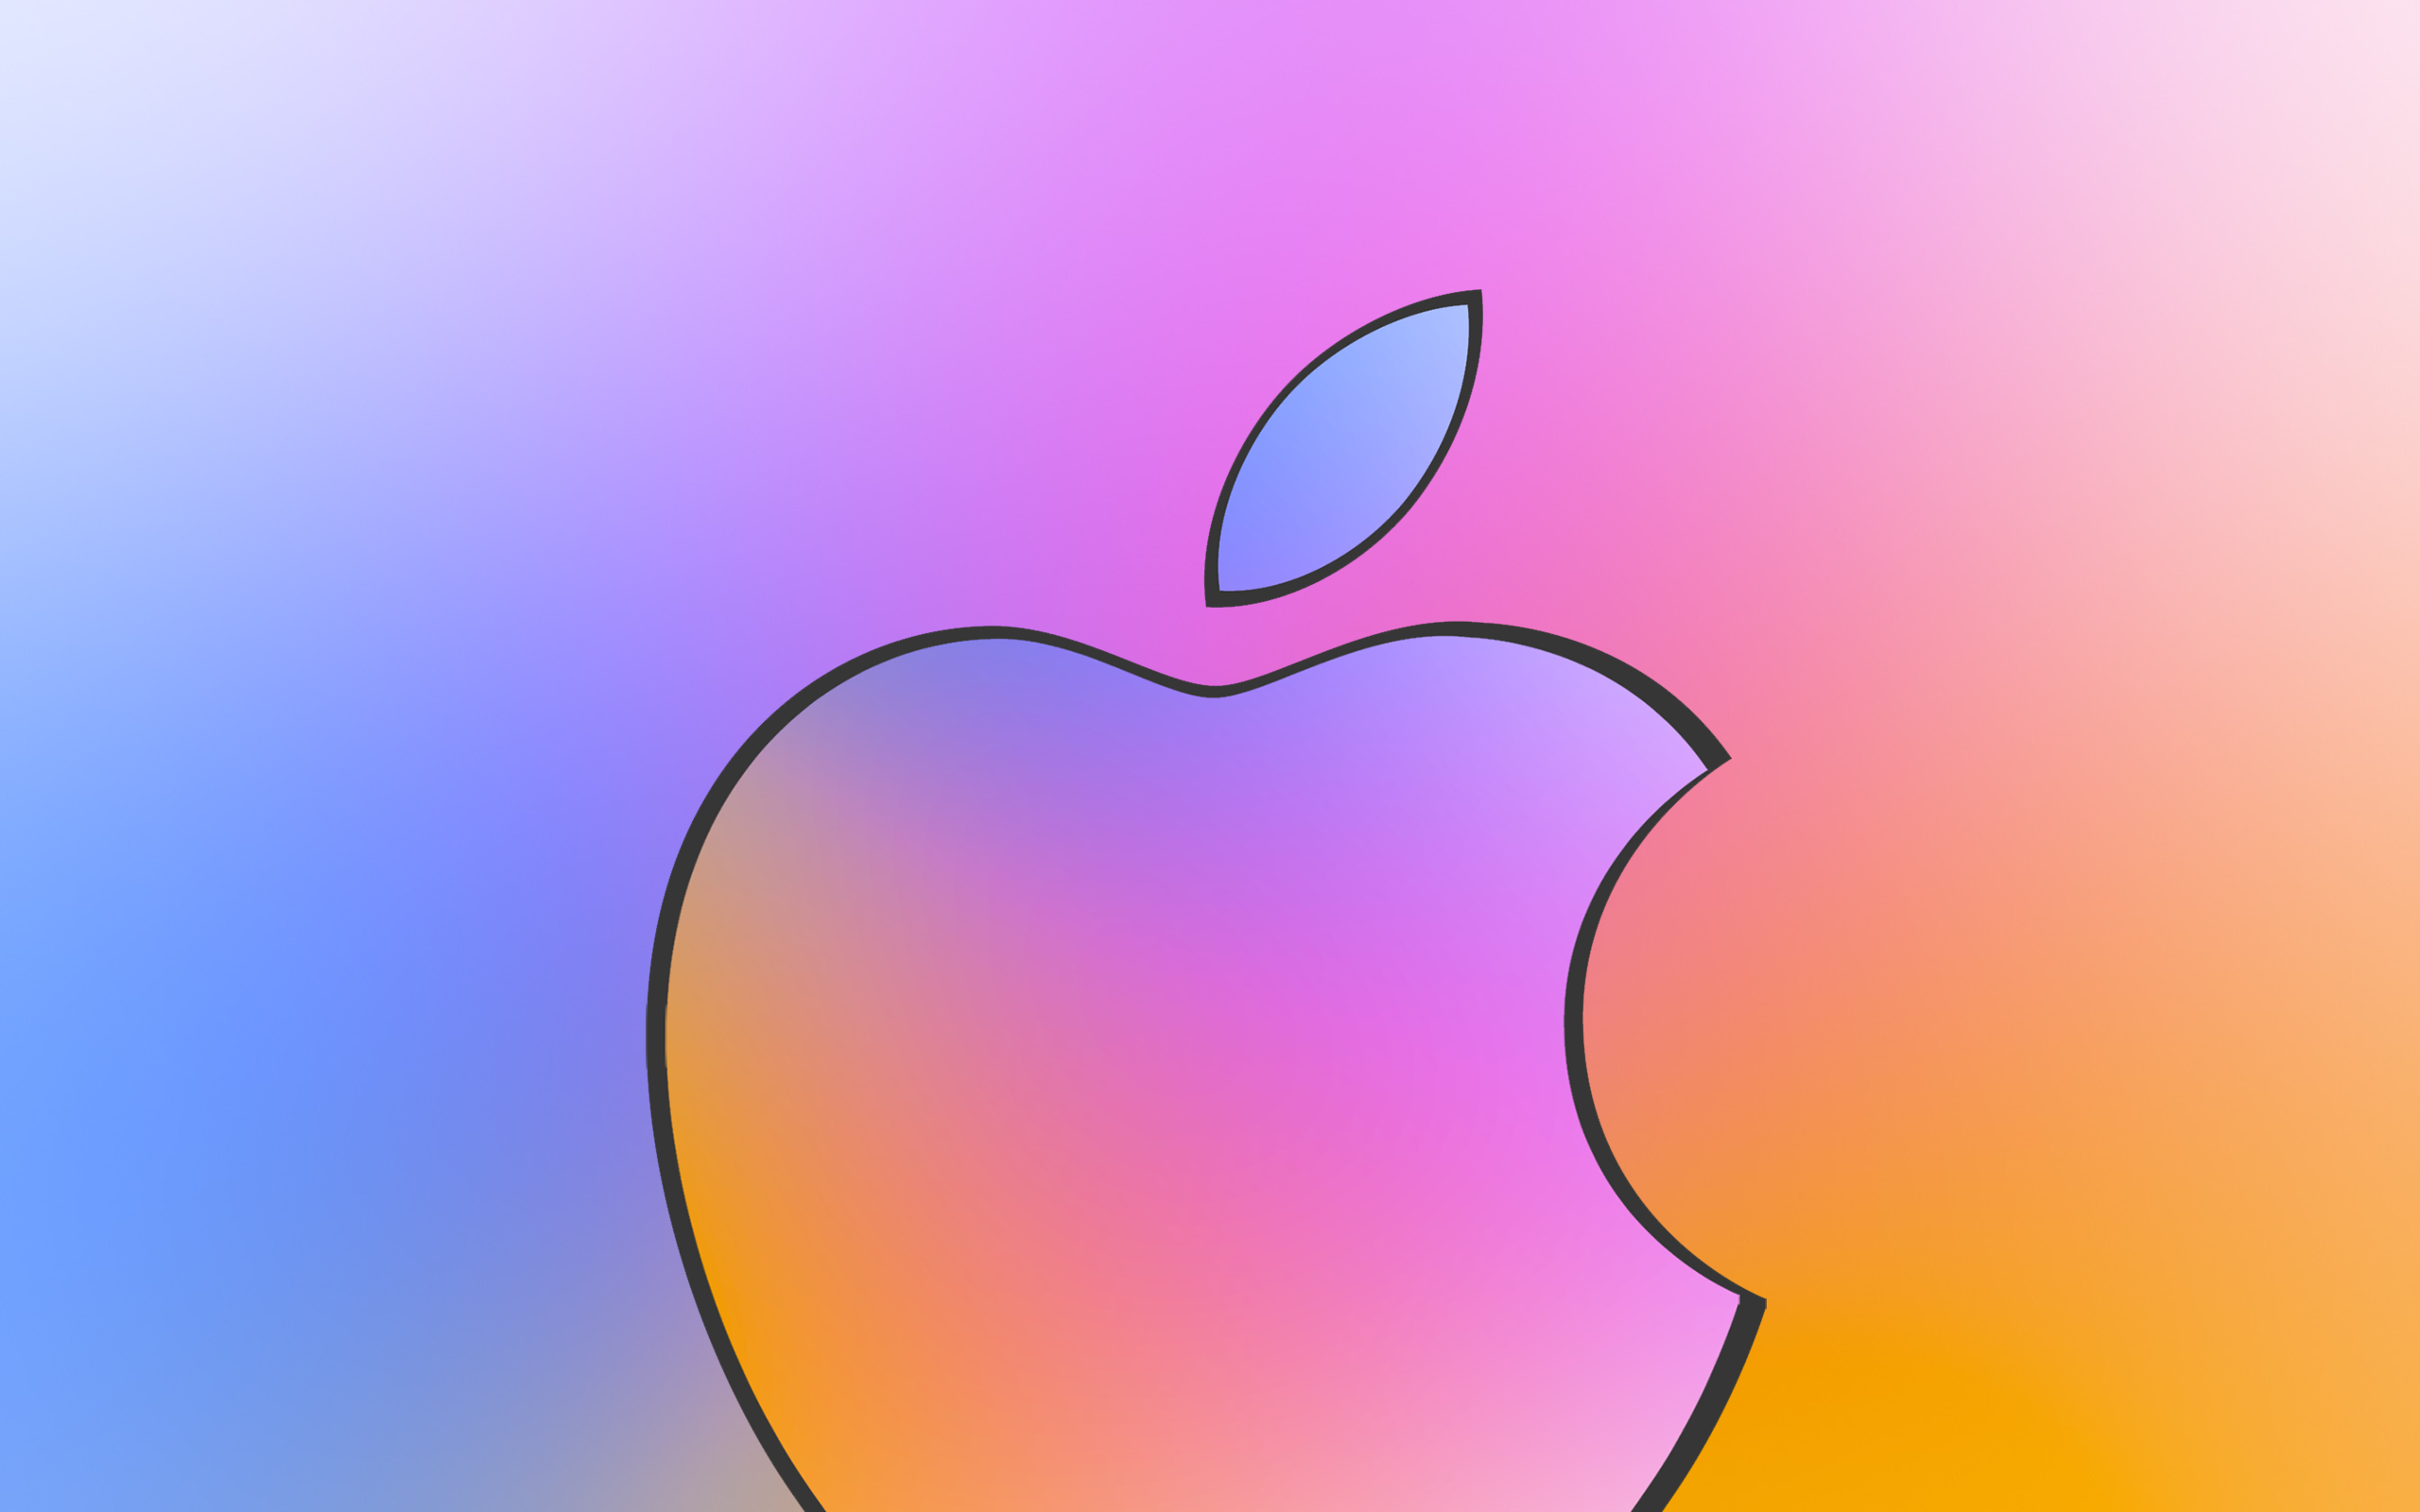 Apple Card wallpapers for iPhone, iPad, and desktop